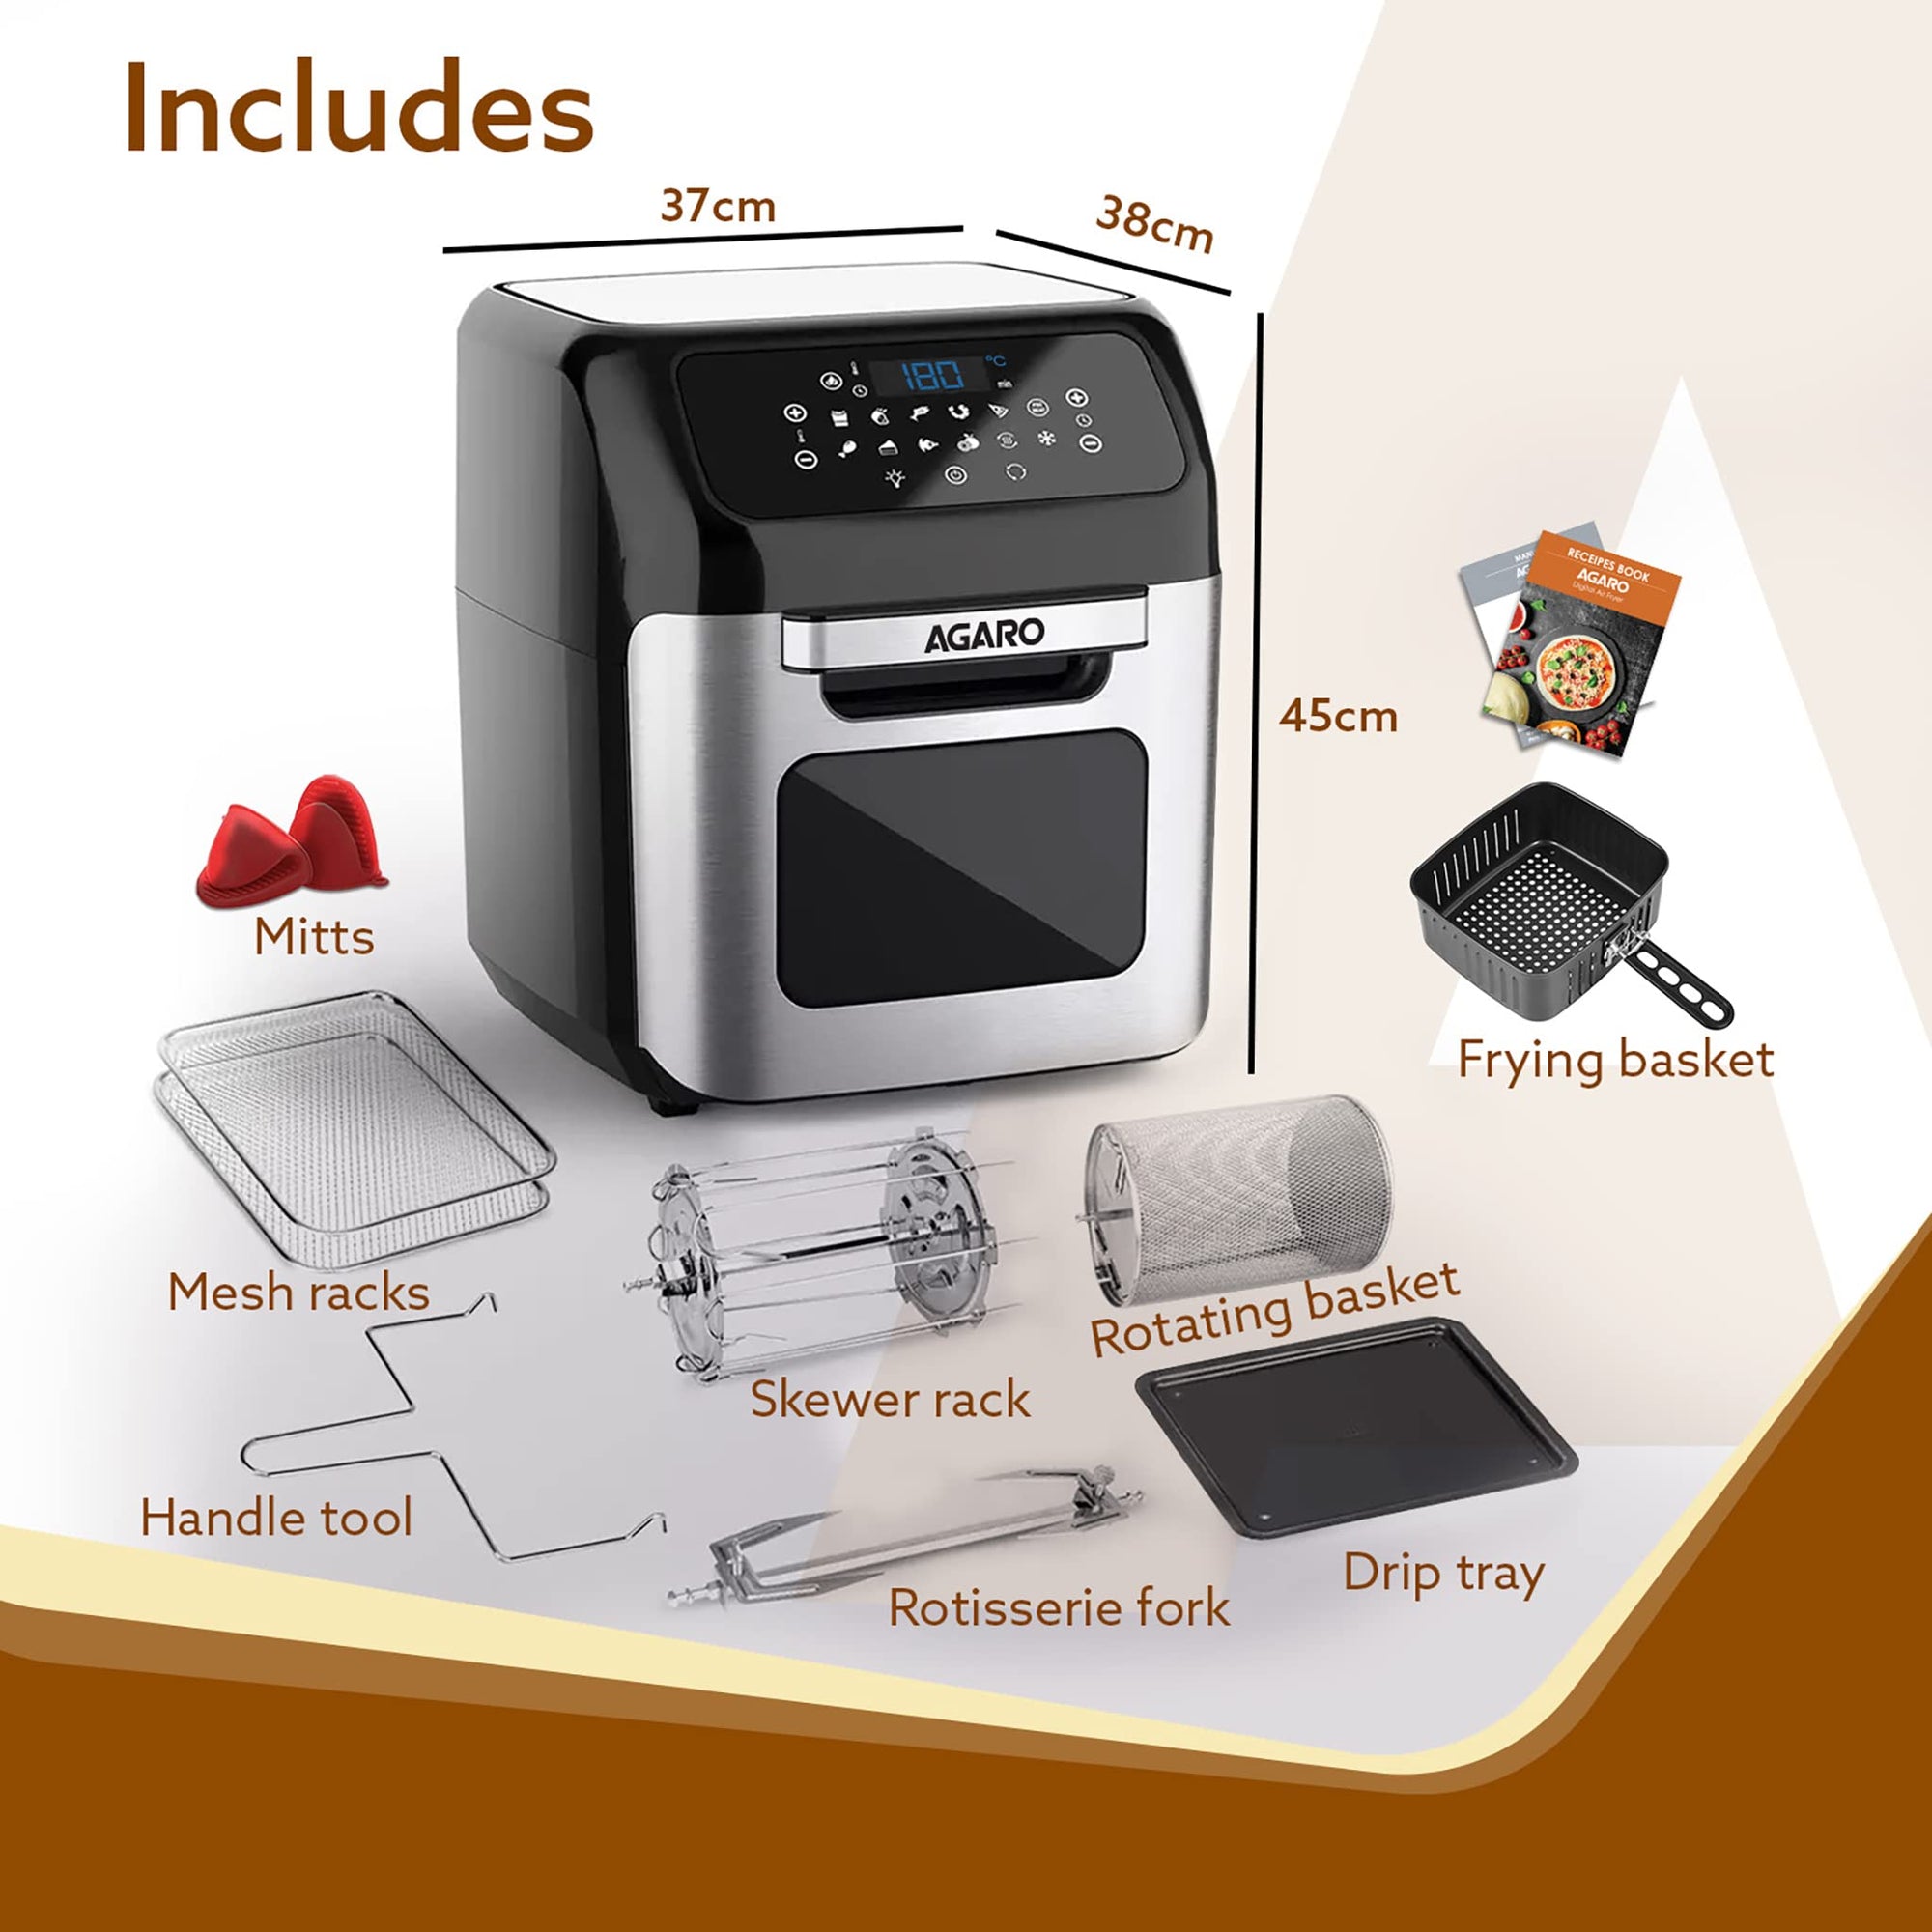 AGARO Regency Air Fryer,12 Liters,Family Rotisserie Oven,1800W Electric Air Fryer Toaster Oven,Tilt Led Digital Touchscreen,9 Presets Menu For Baking, Roasting,Toasting Etc,With Accessories, Silver